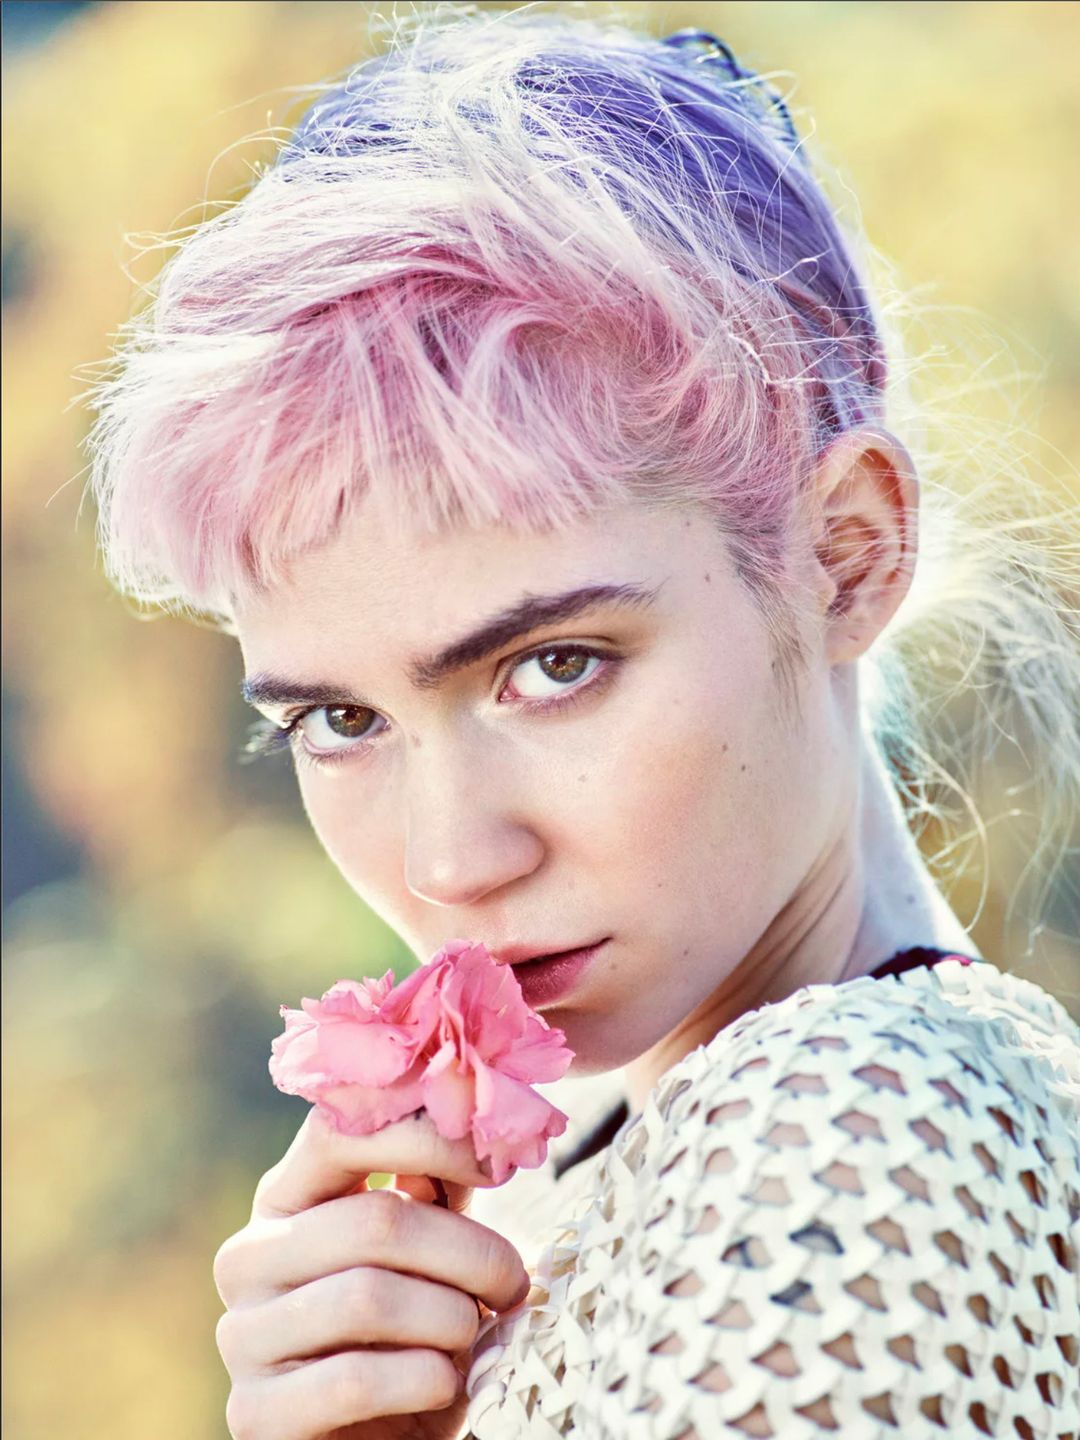 Grimes who is her mother